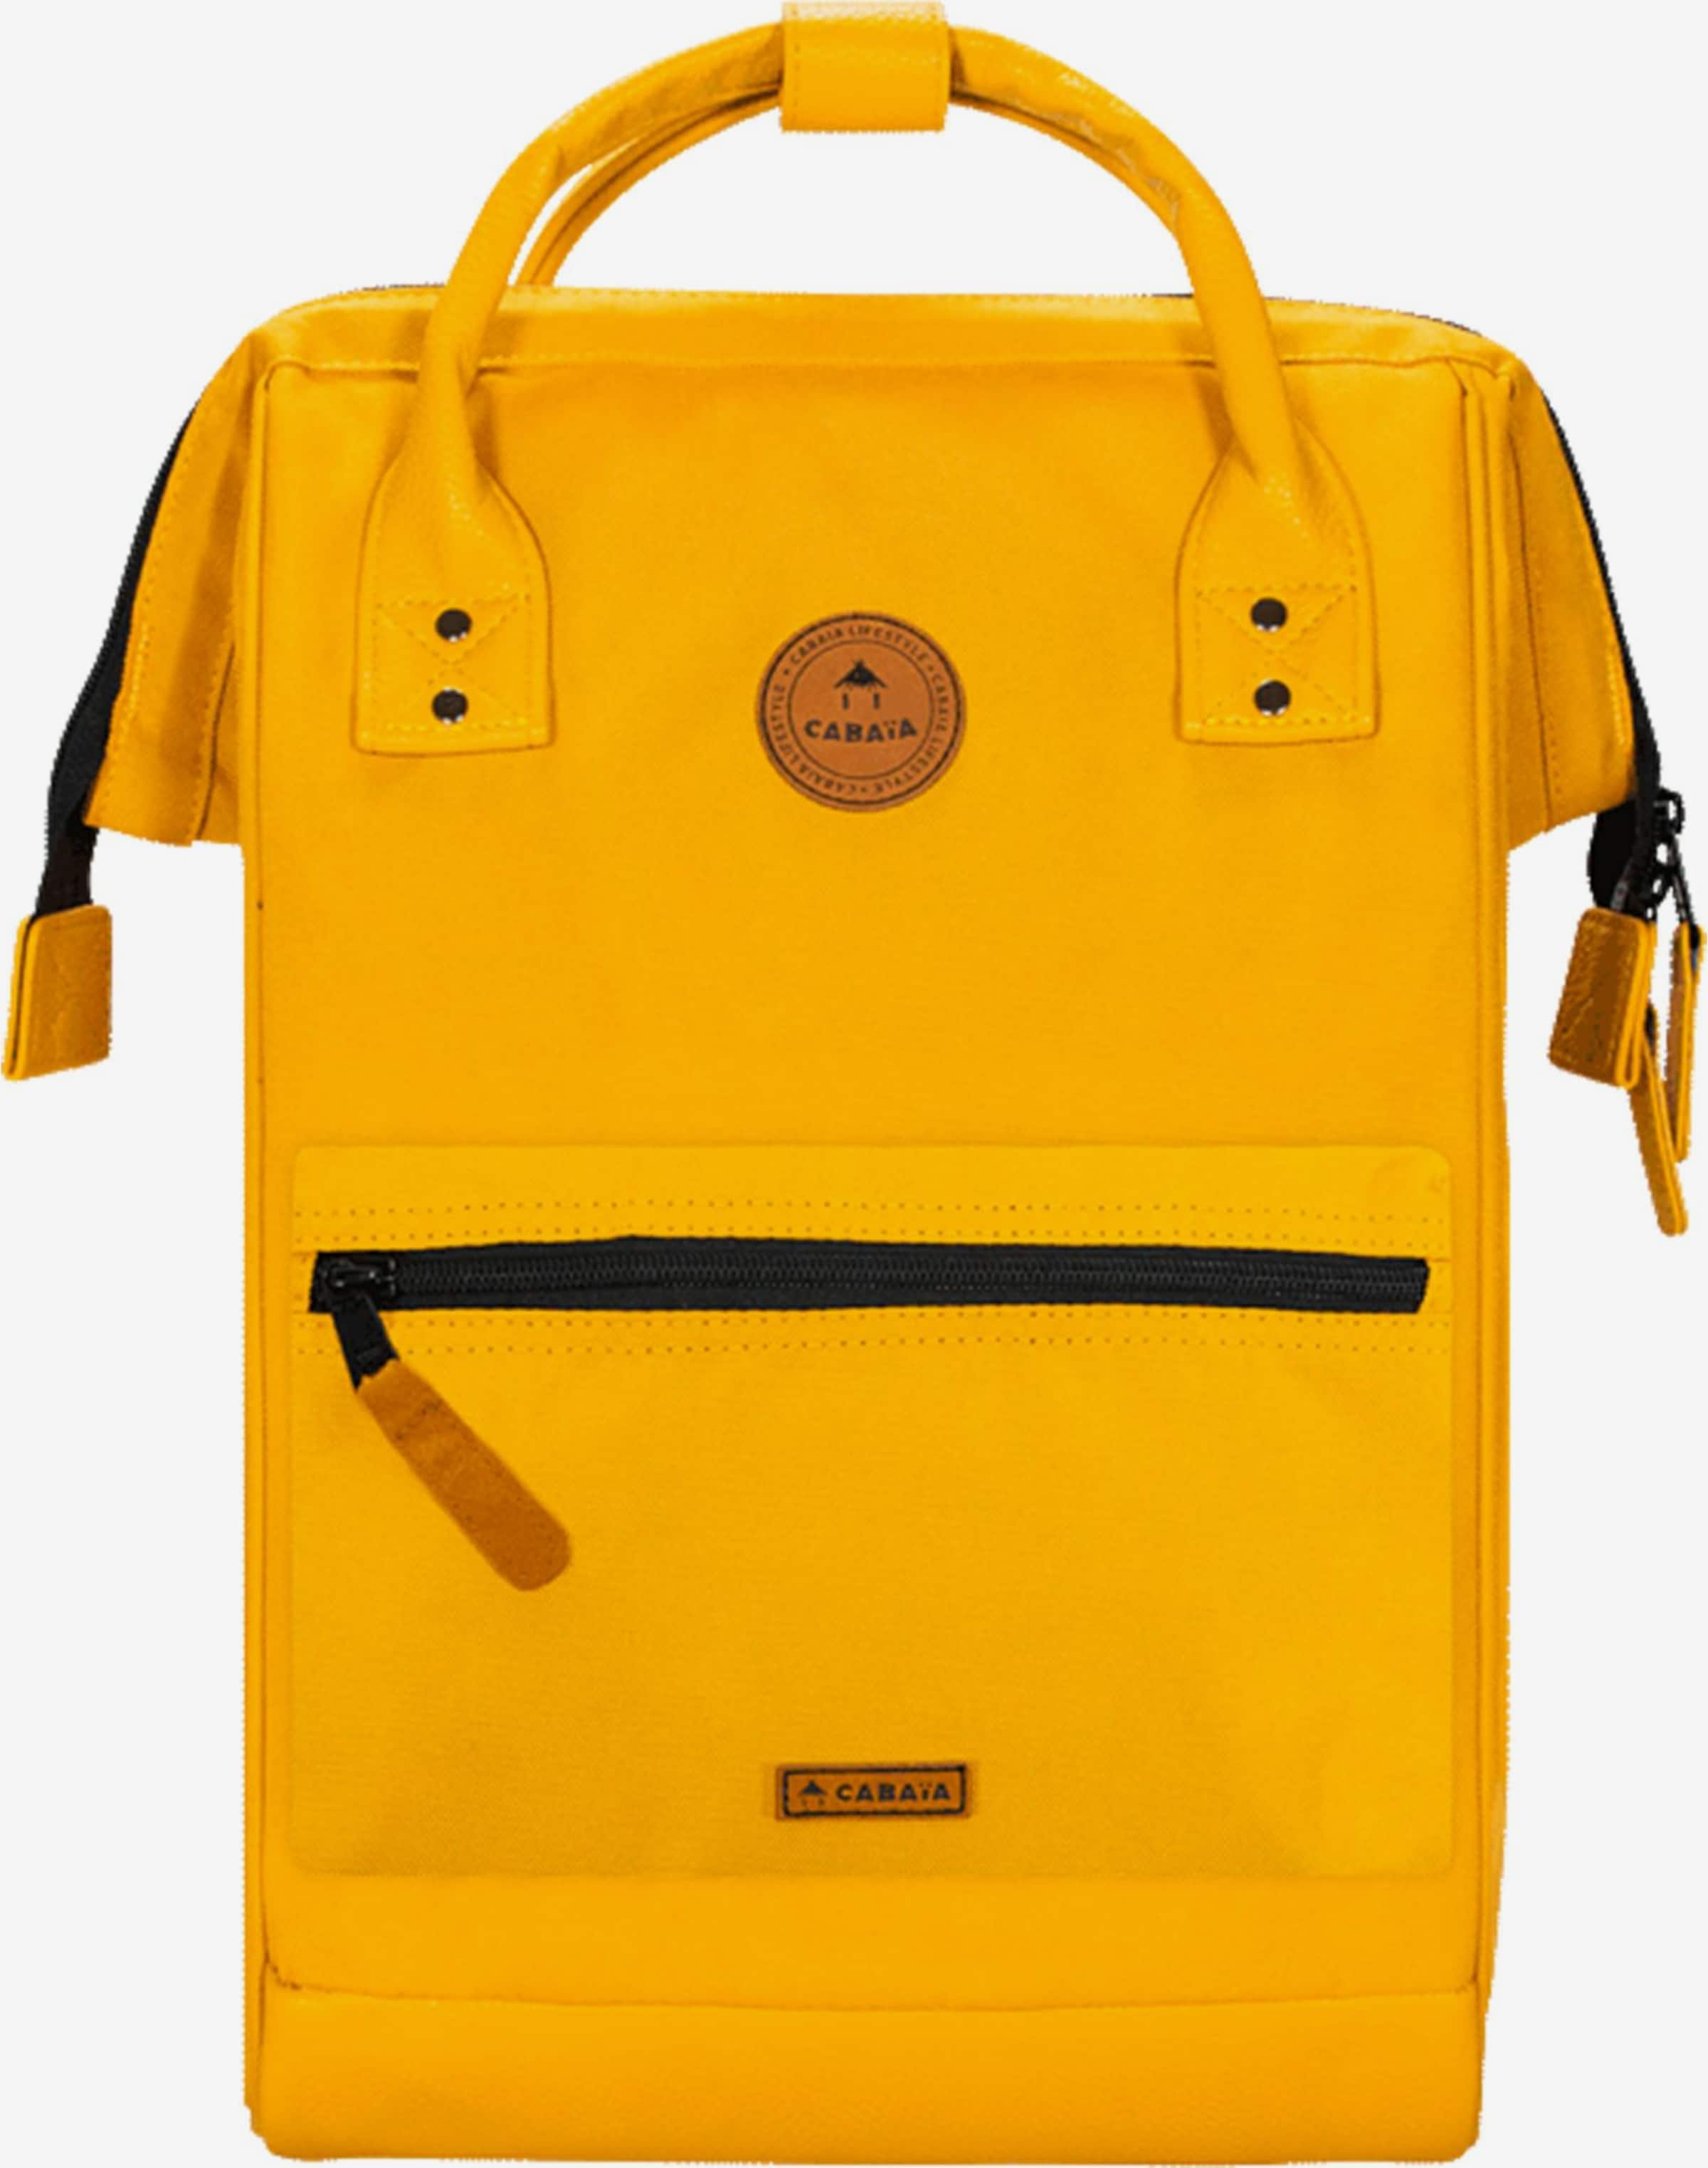 Cabaia Backpack 'Adventurer' in Yellow Gold